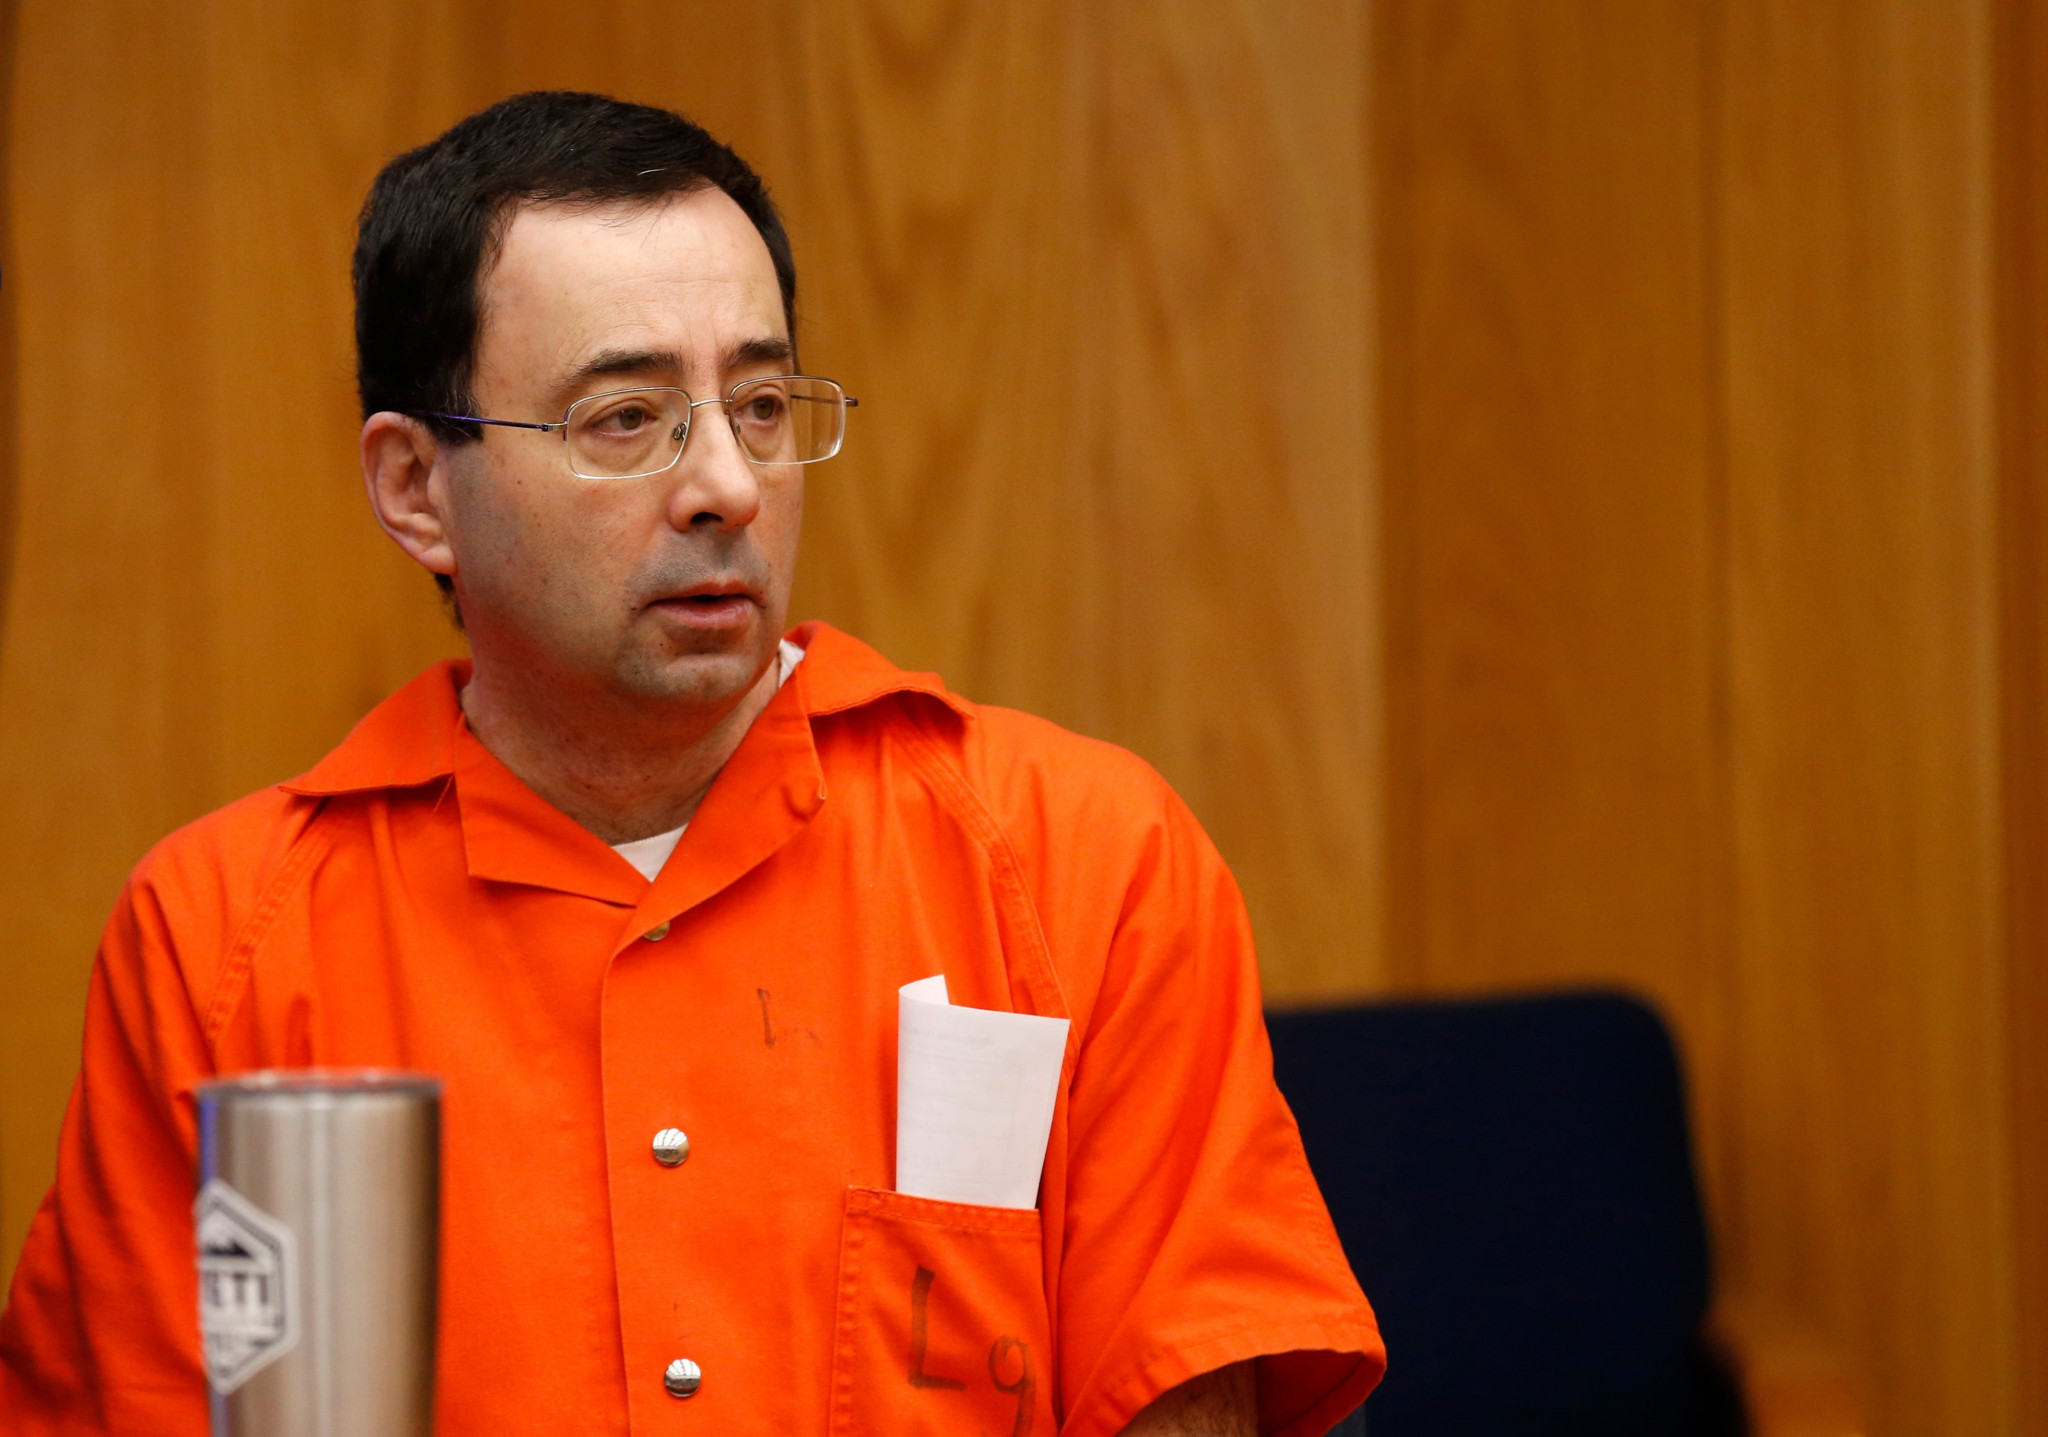 Father attempts to attack disgraced doctor Nassar in court as USOC selects independent investigator to examine abuse